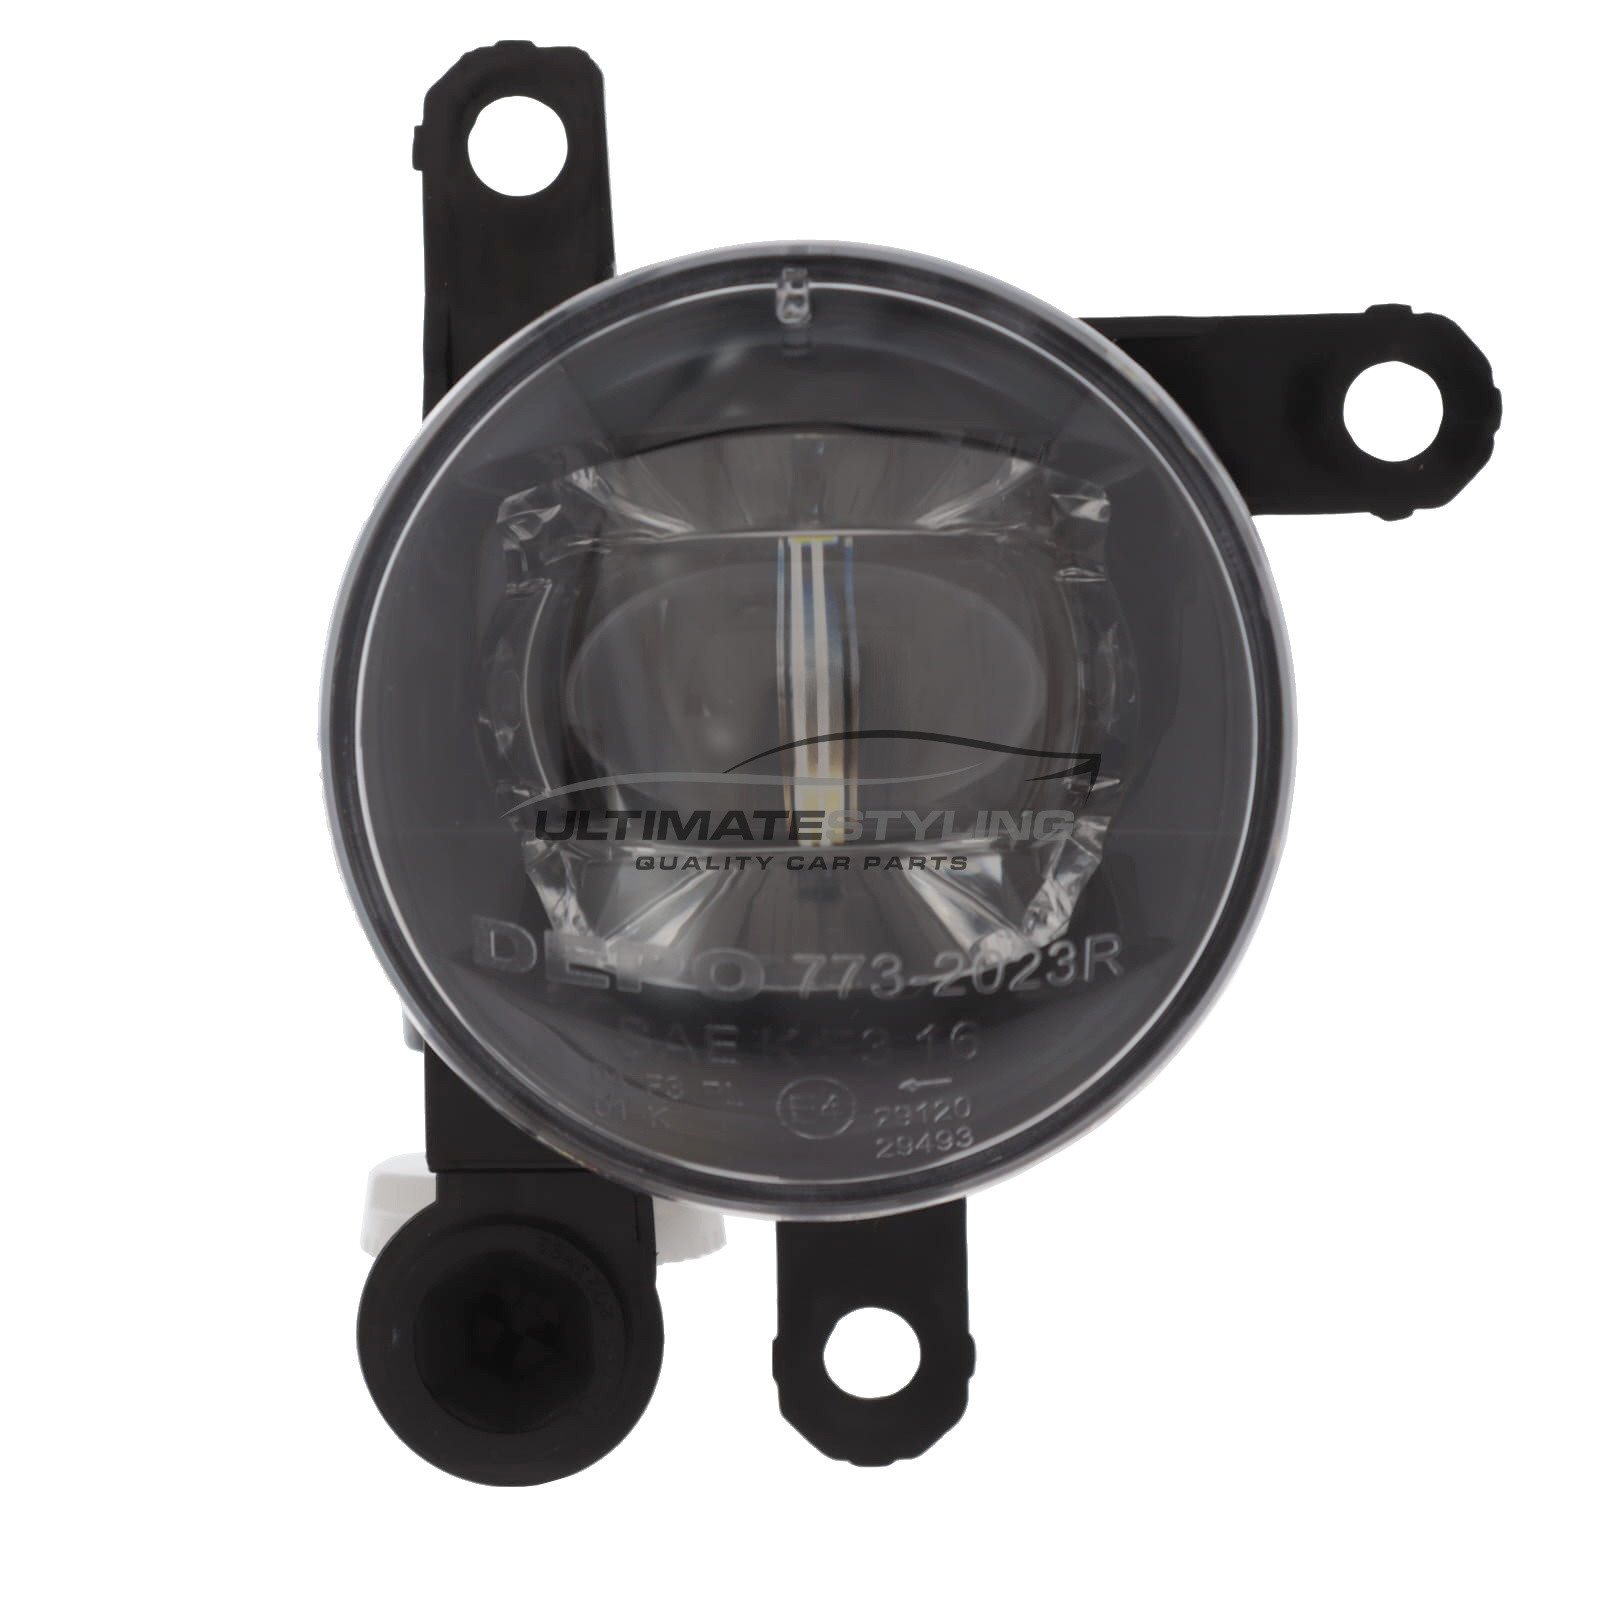 Front Fog Light for Vauxhall Insignia